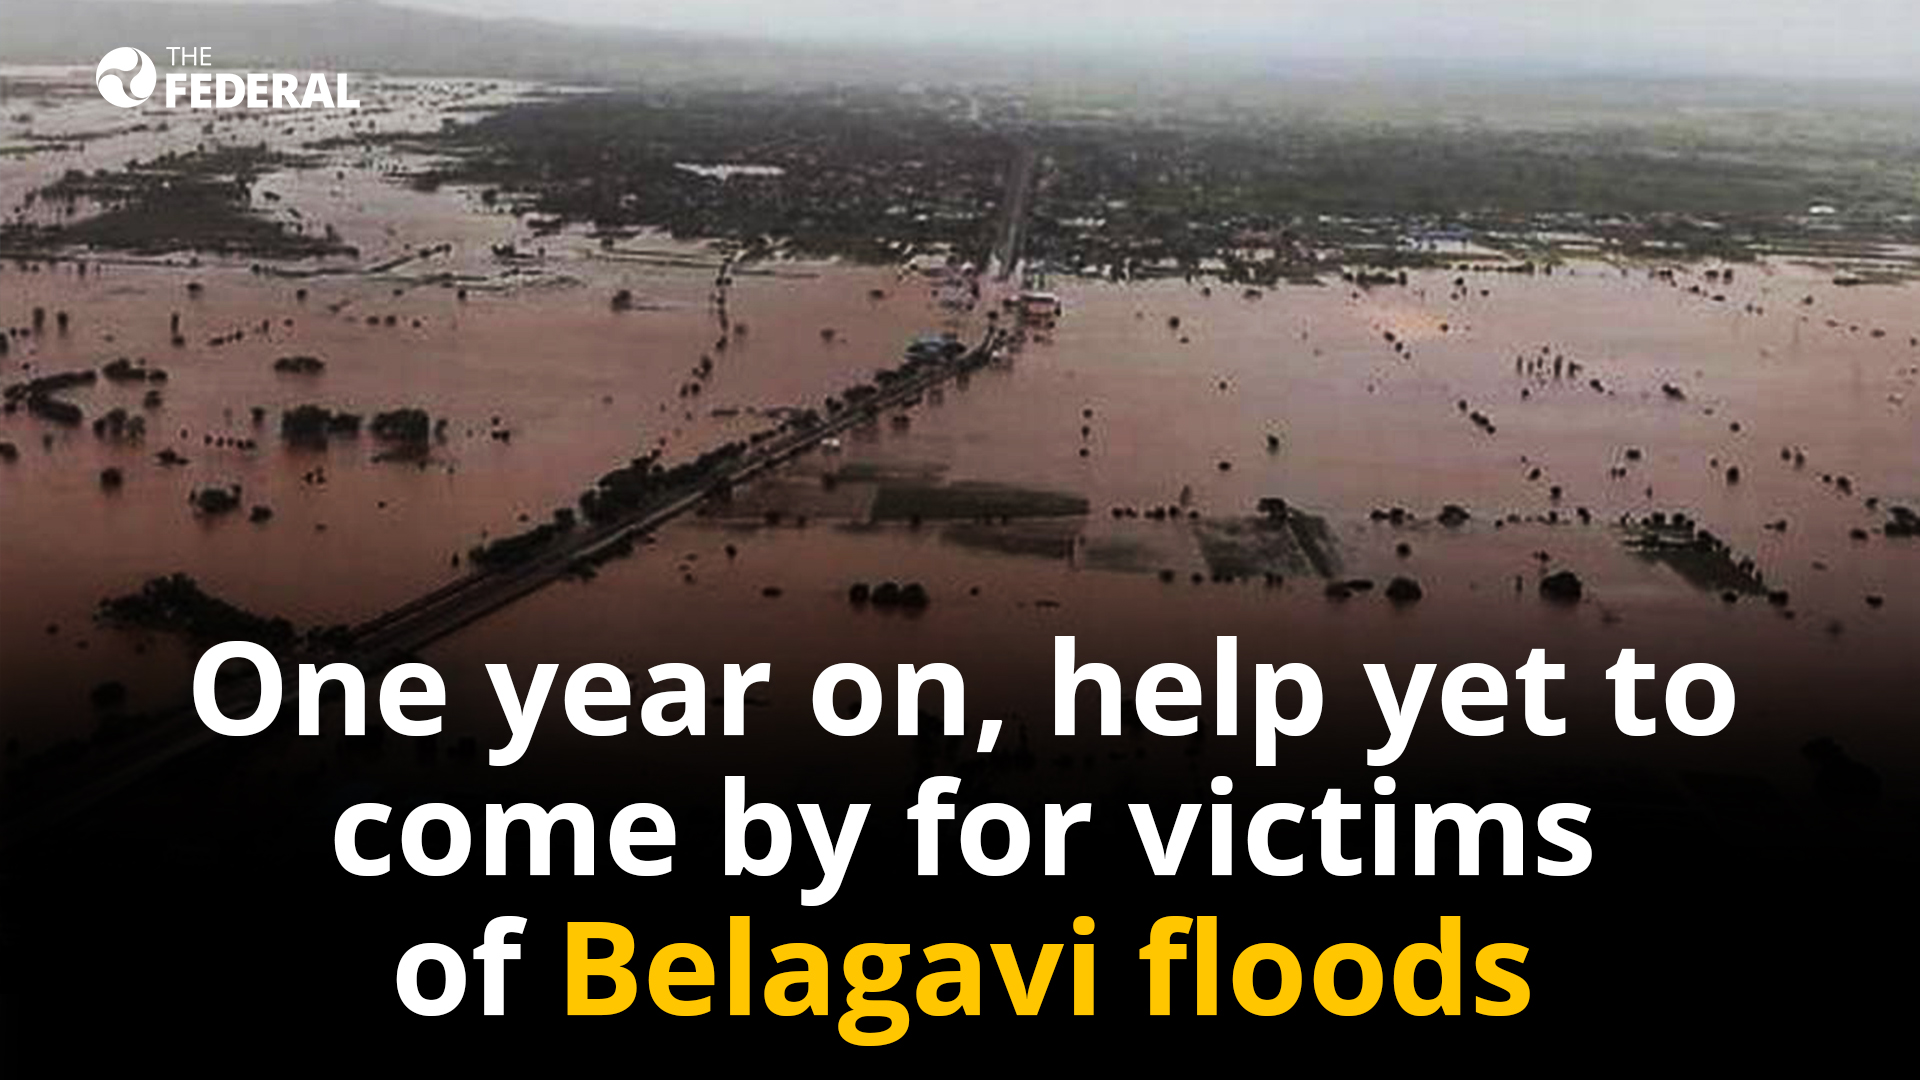 One year on, help yet to come by for victims of Belagavi floods